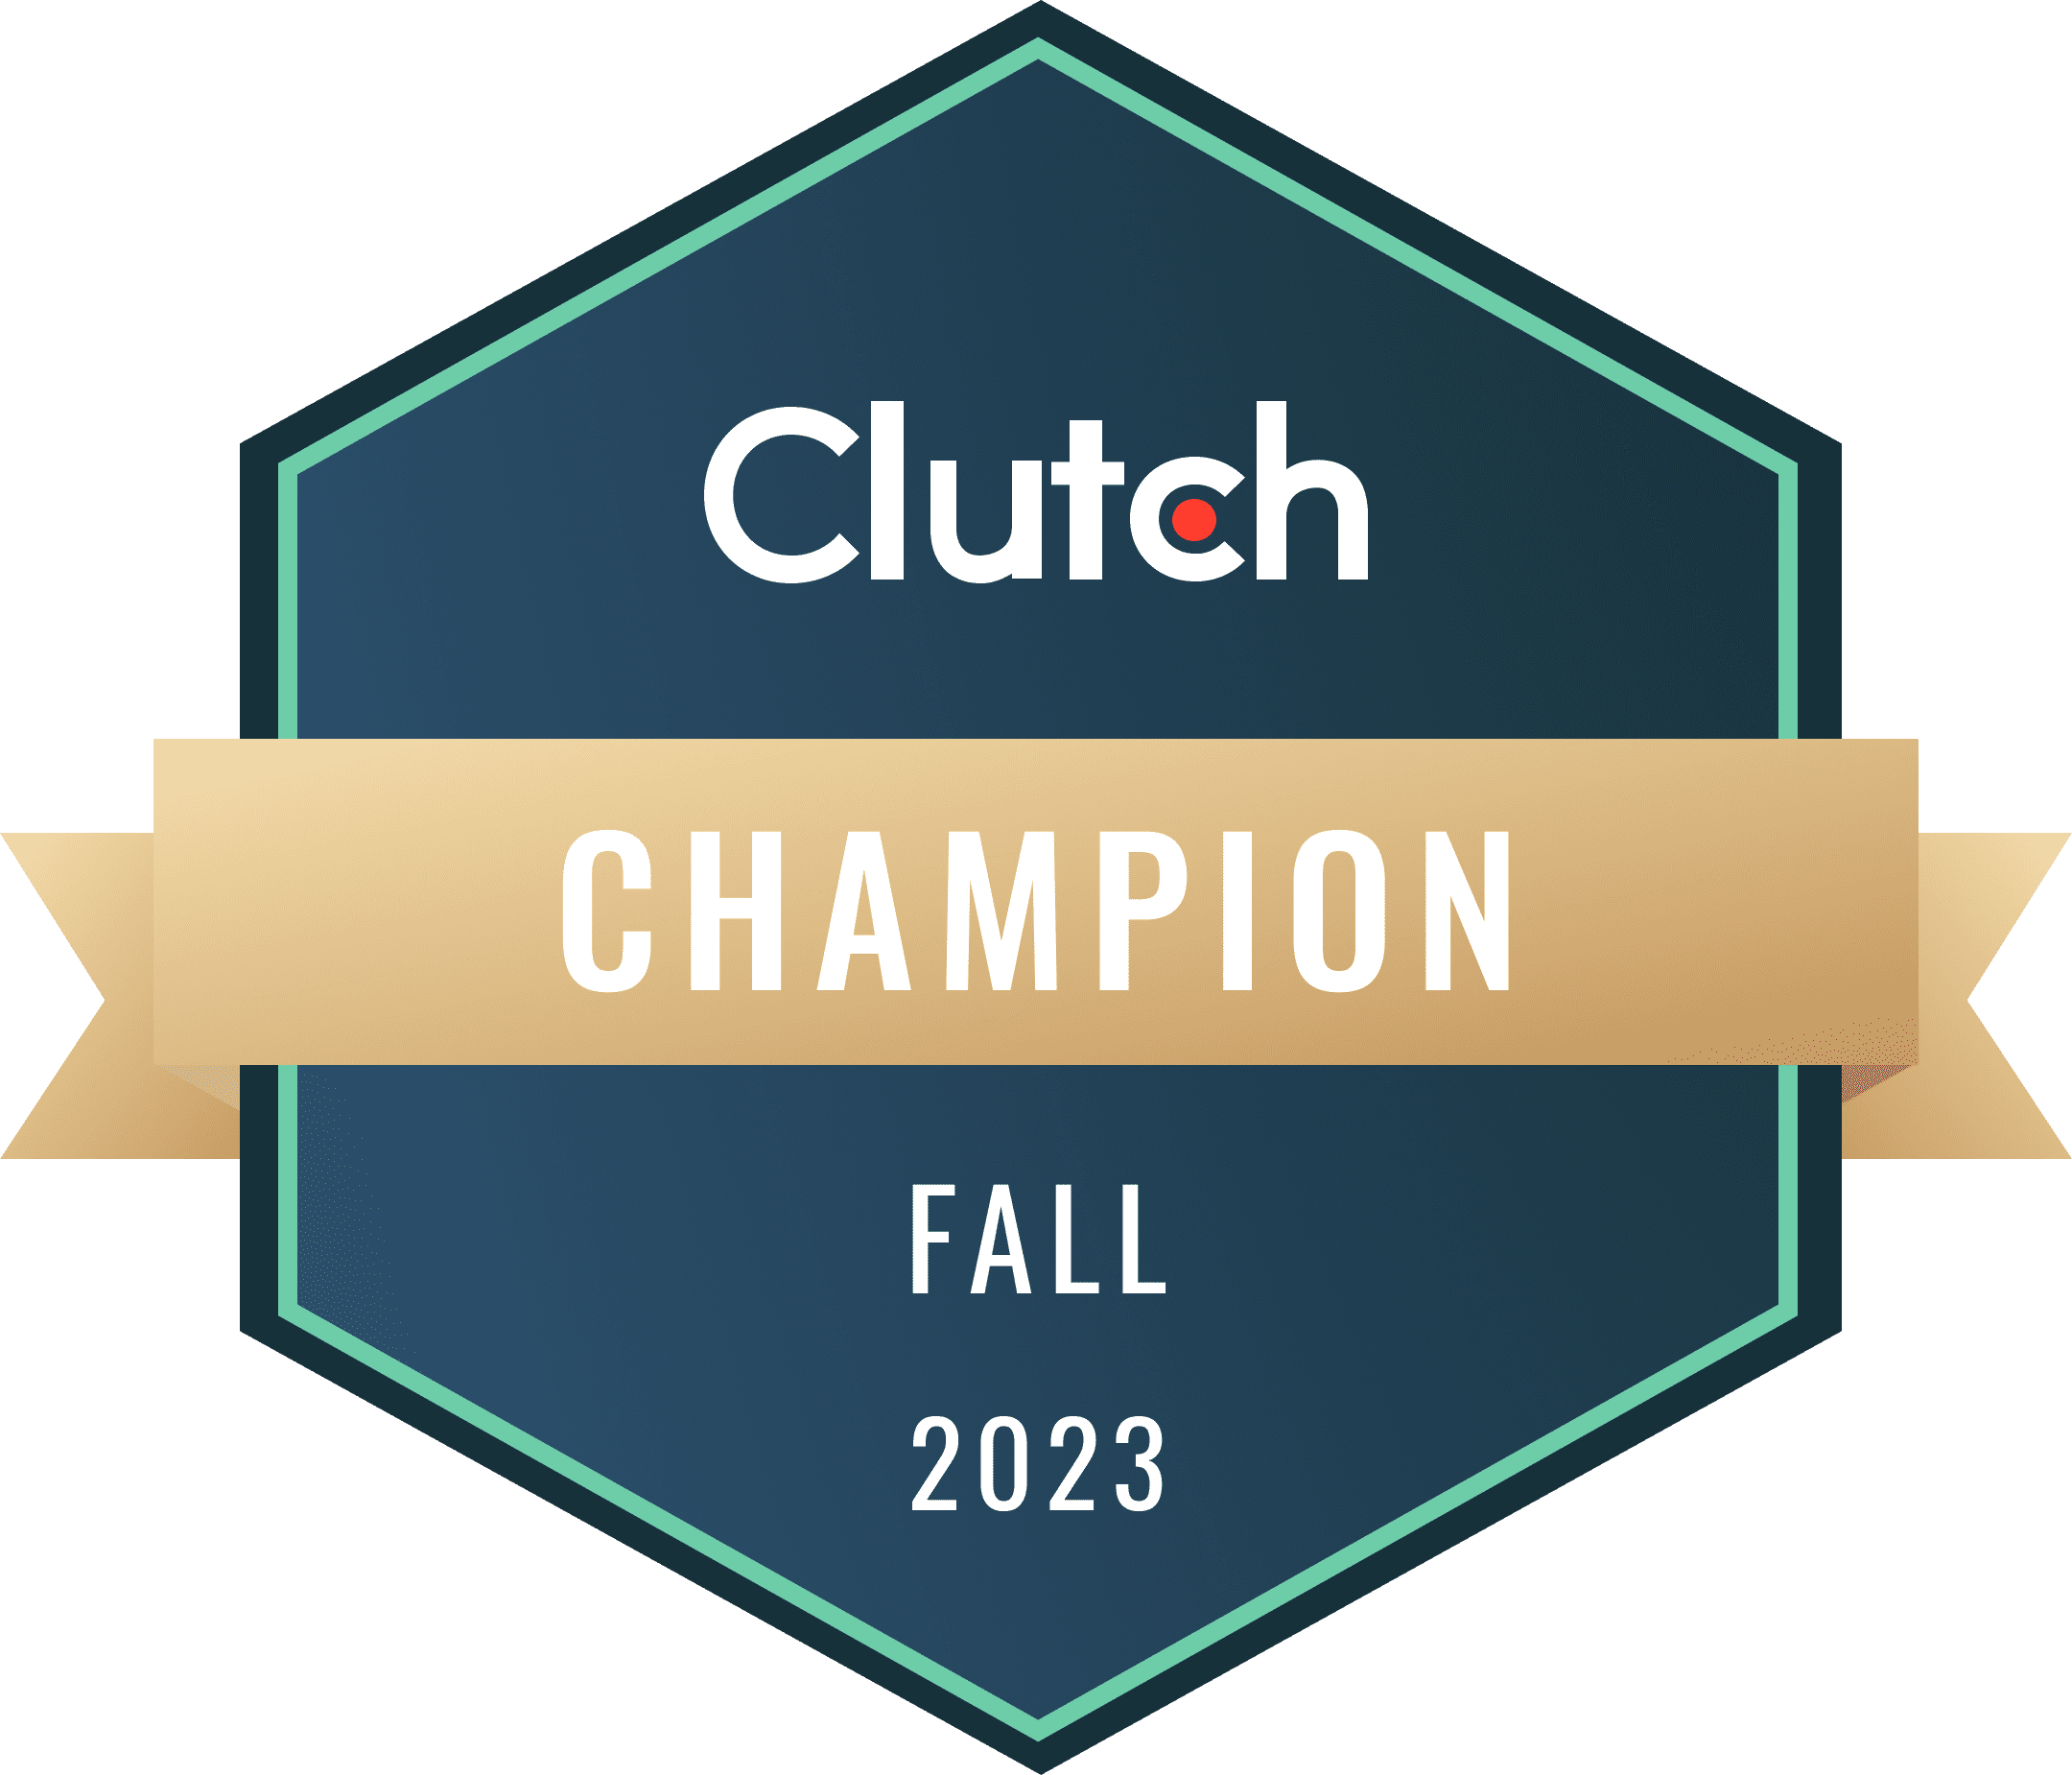 Awarded the Clutch Champion Fall 2023 Award, for being among the top b2b marketing agencies.